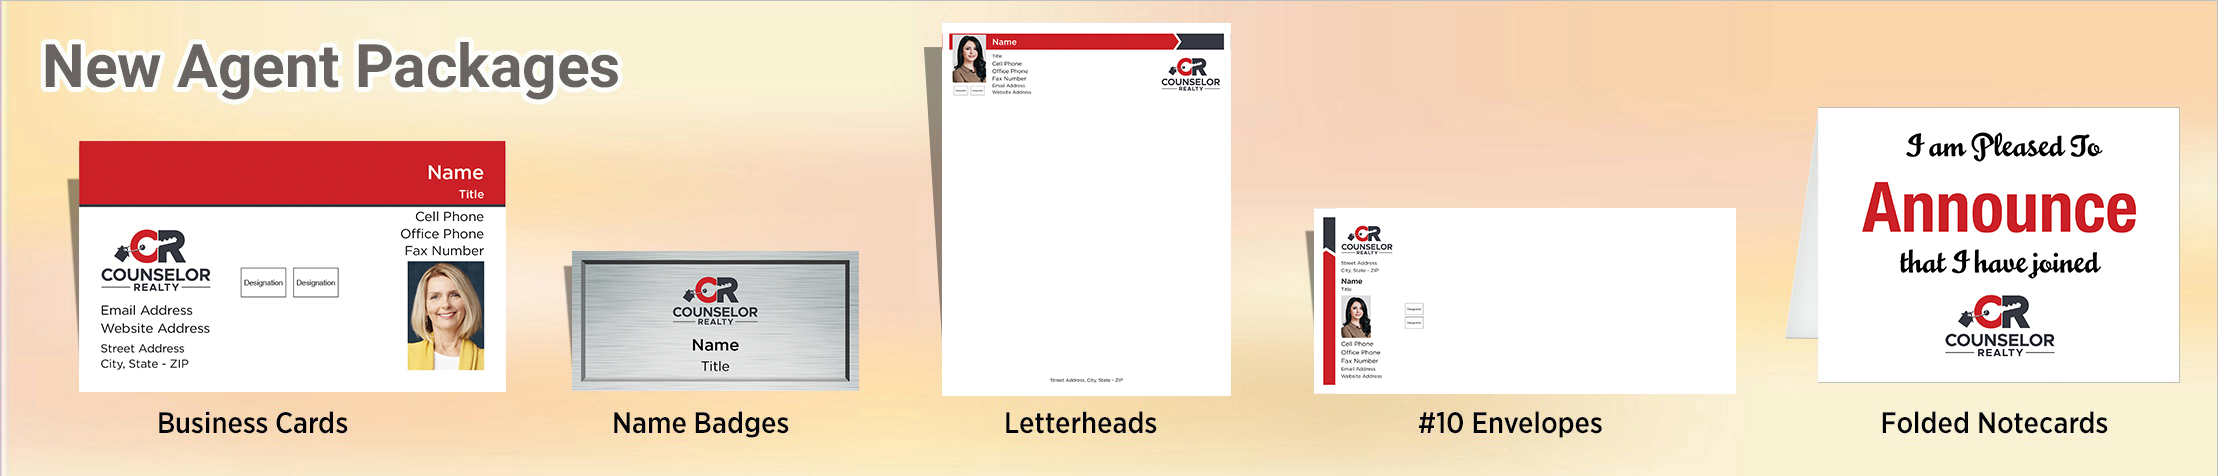 Counselor Realty Real Estate Gold, Silver and Bronze Agent Packages - Counselor Realty approved vendor personalized business cards, letterhead, envelopes and note cards | BestPrintBuy.com